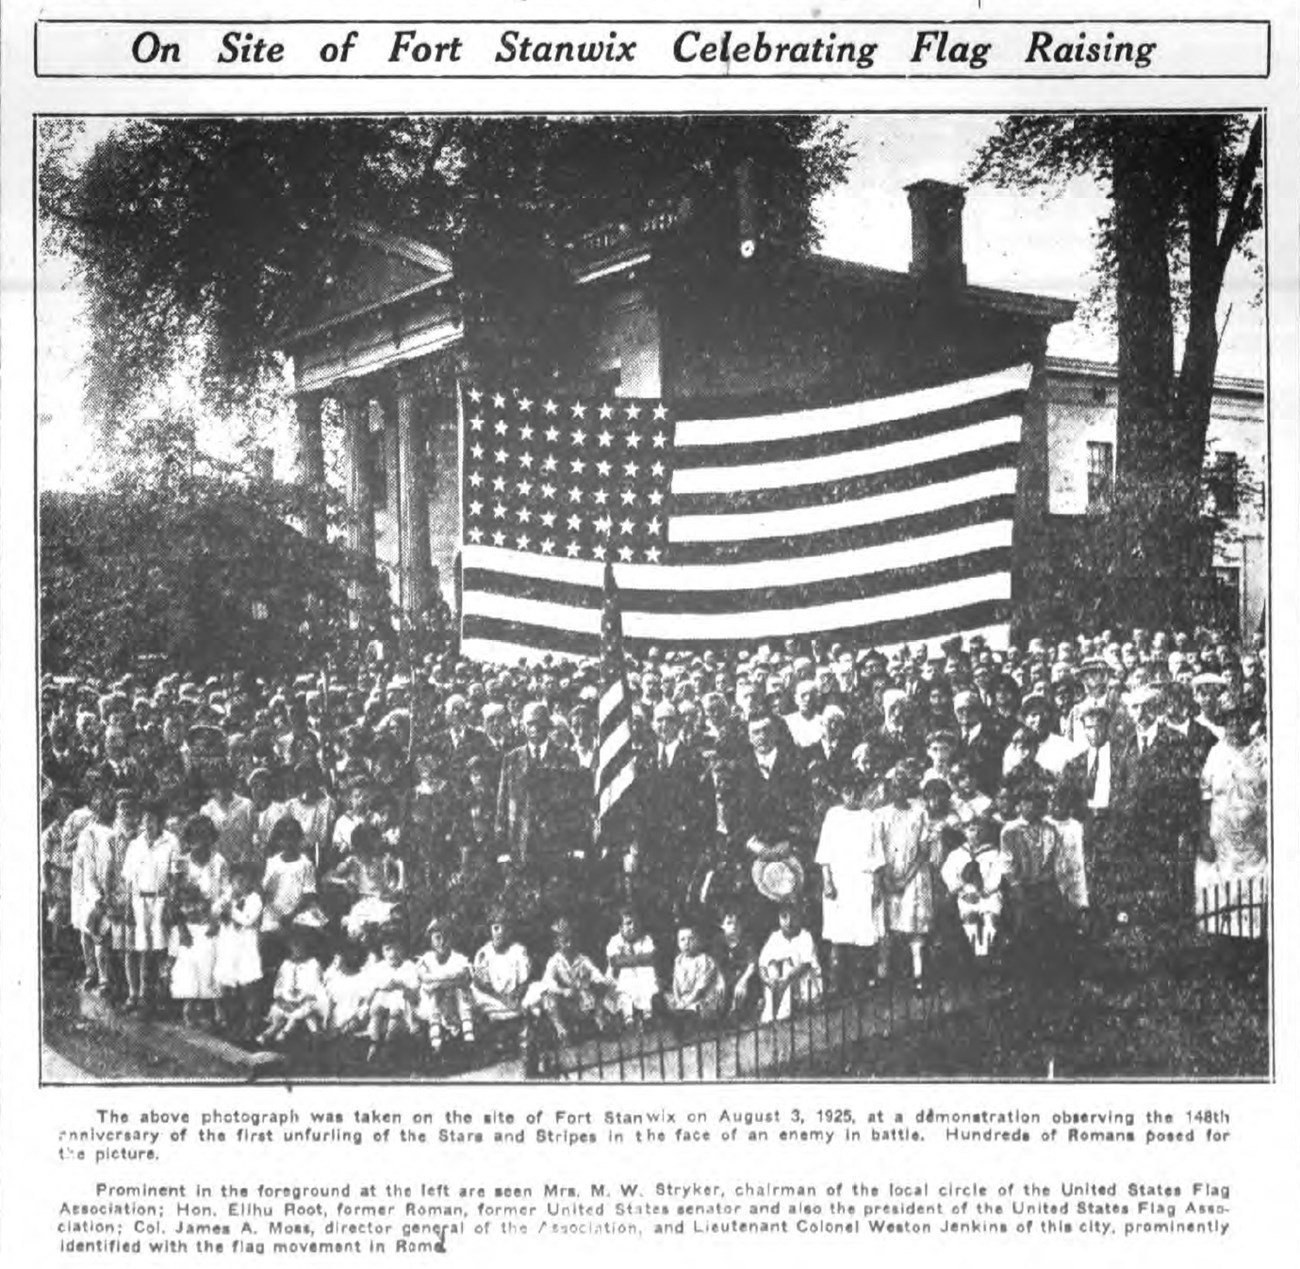 An old black and white photo of a group of children standing underneath a large American flag, in front of a large building with columns.